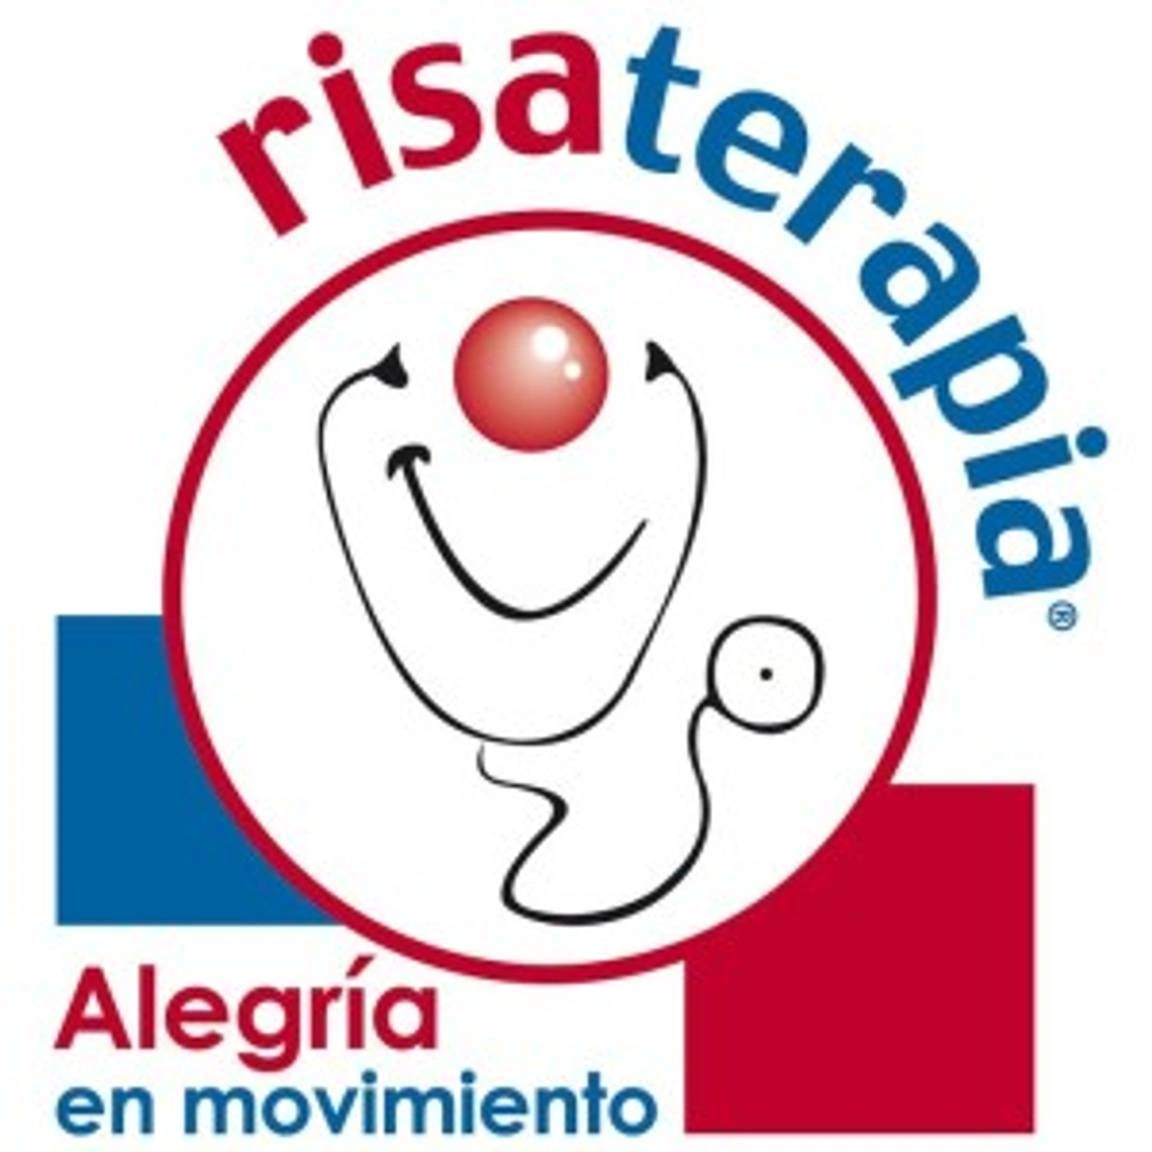 A graphic advertising risaterapia